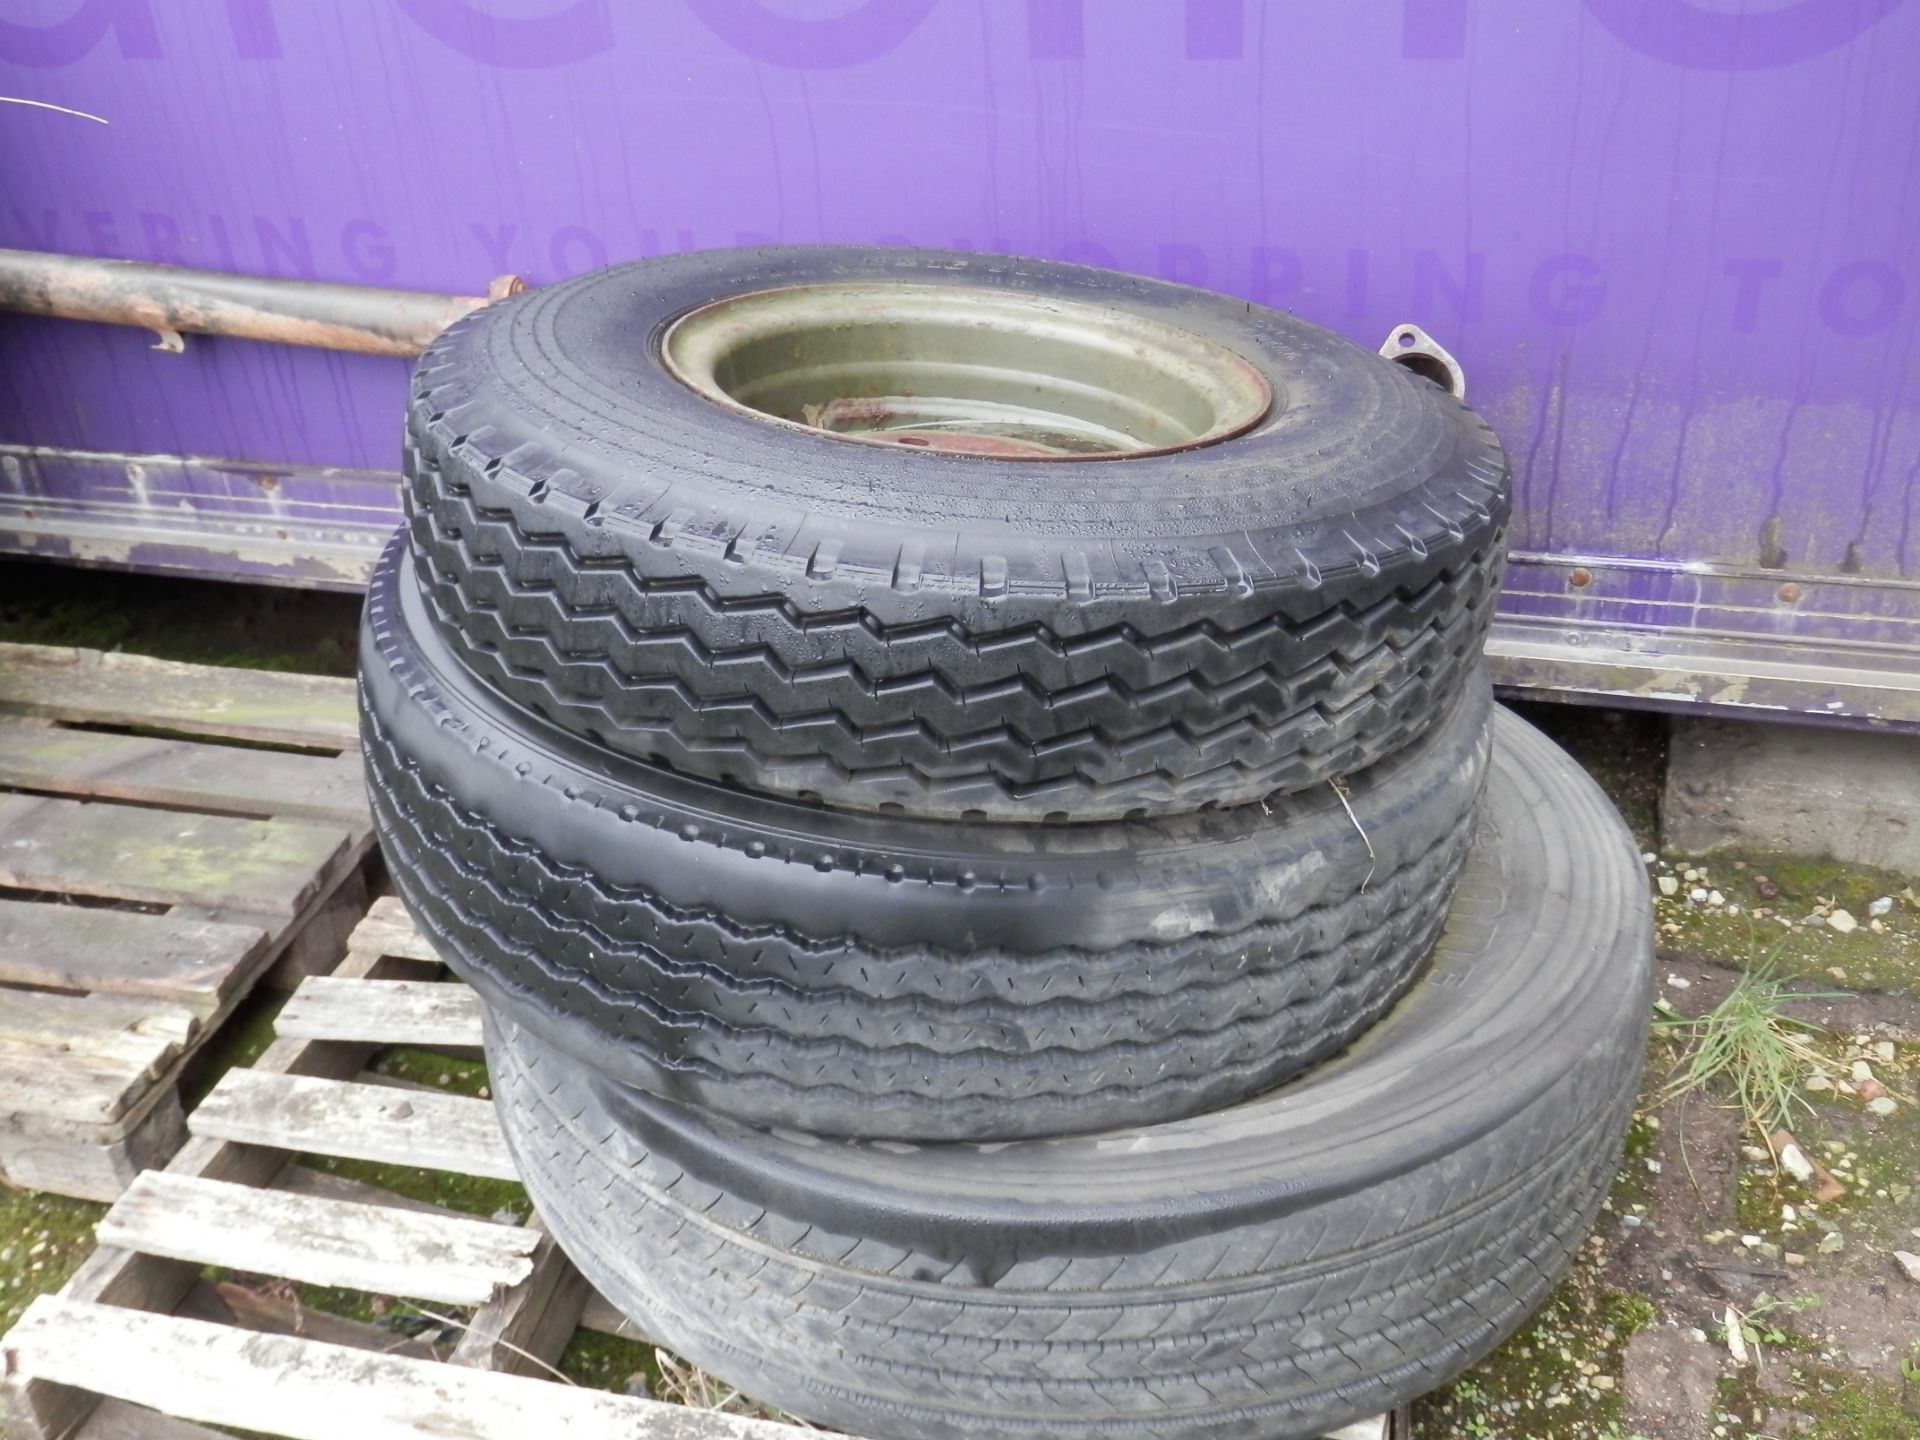 85 + ASSORTED LORRY, CAR & TRAILER TYRES & WHEELS, AS PICTURED. BUYER TO COLLECT COMPLETE - Image 8 of 10